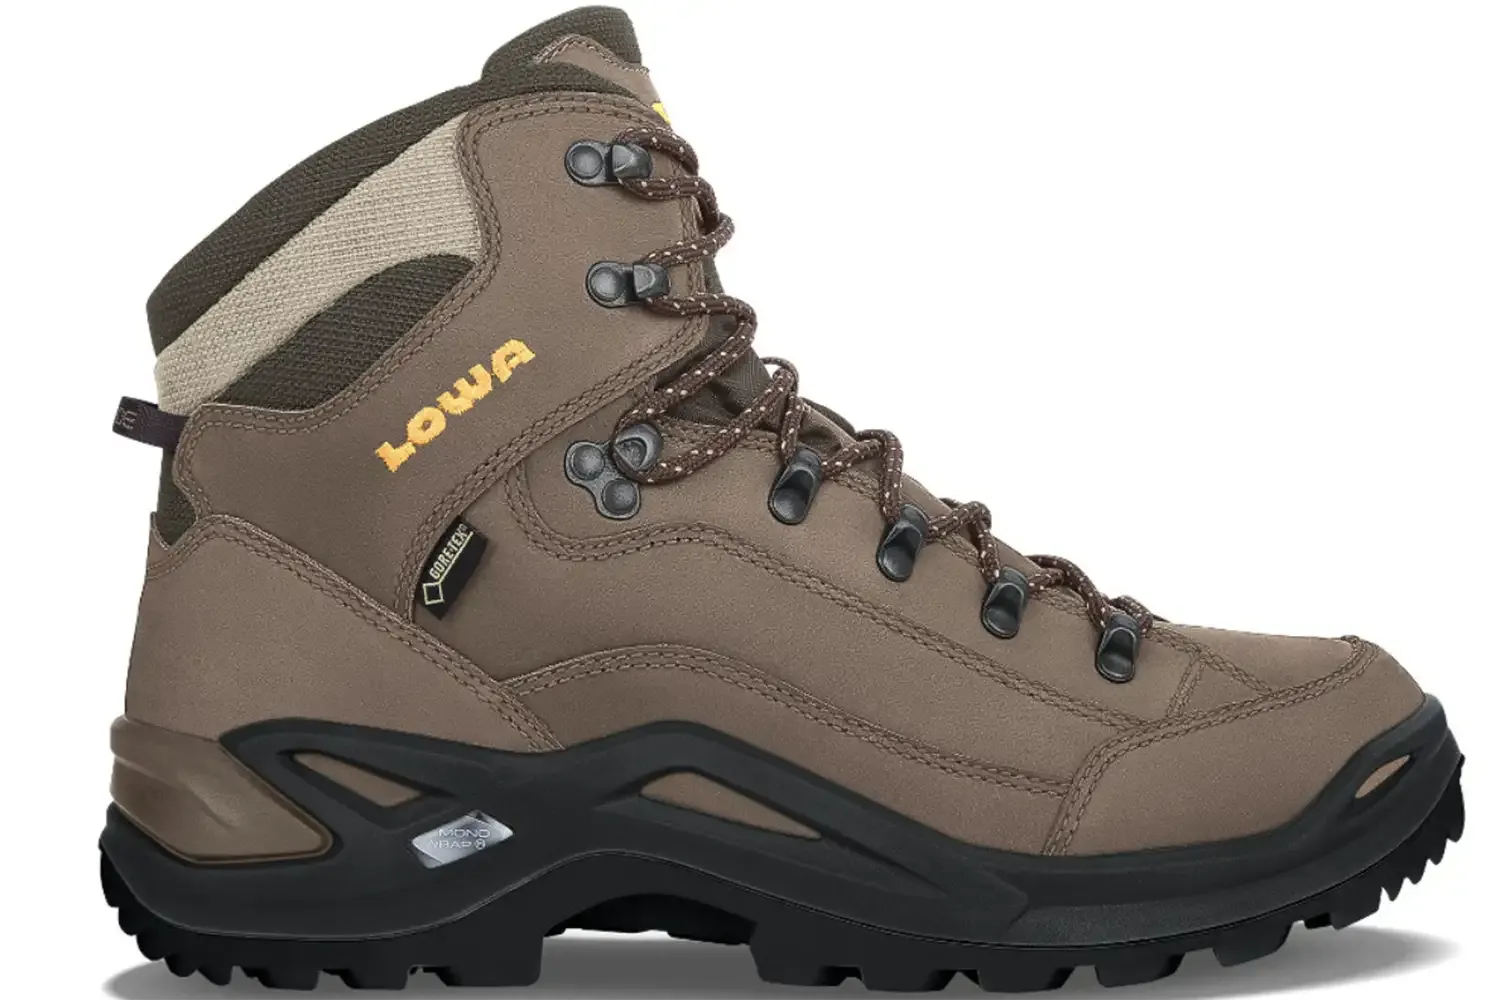 Forbes: Best hiking boots of 2023, According to Rigorous Testing